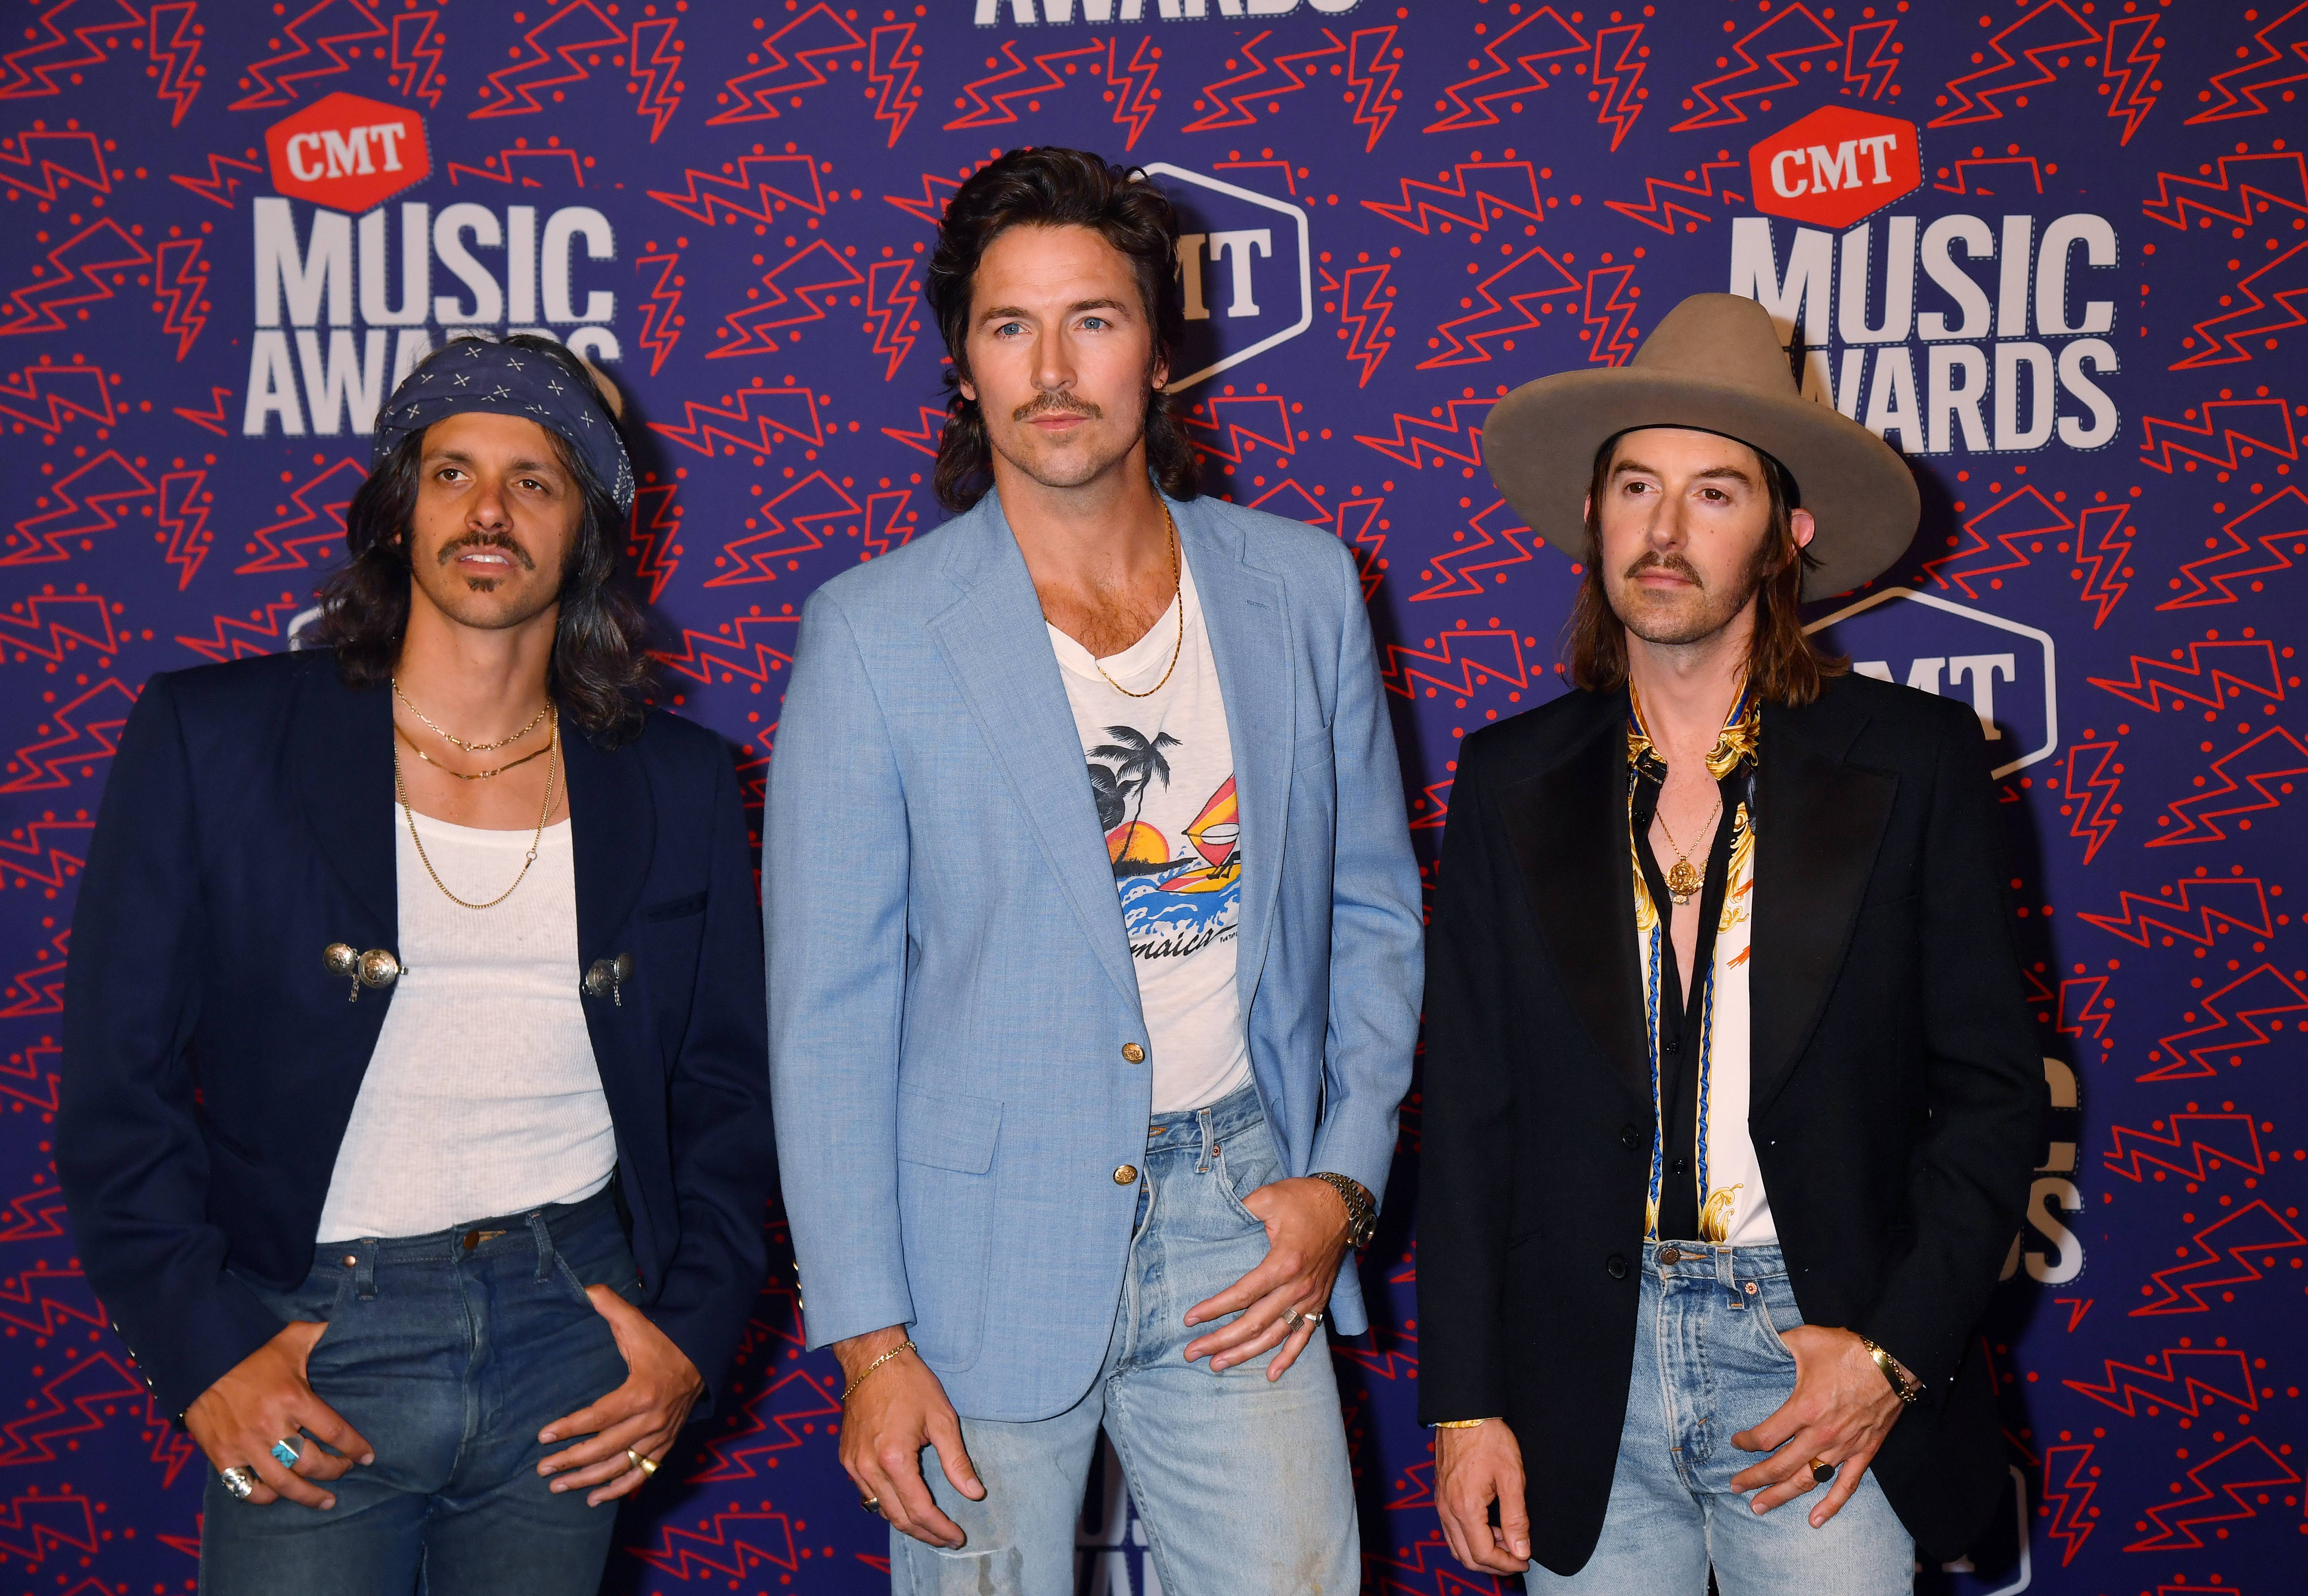 Midland Songs: The 10 Best From the Texas Trio